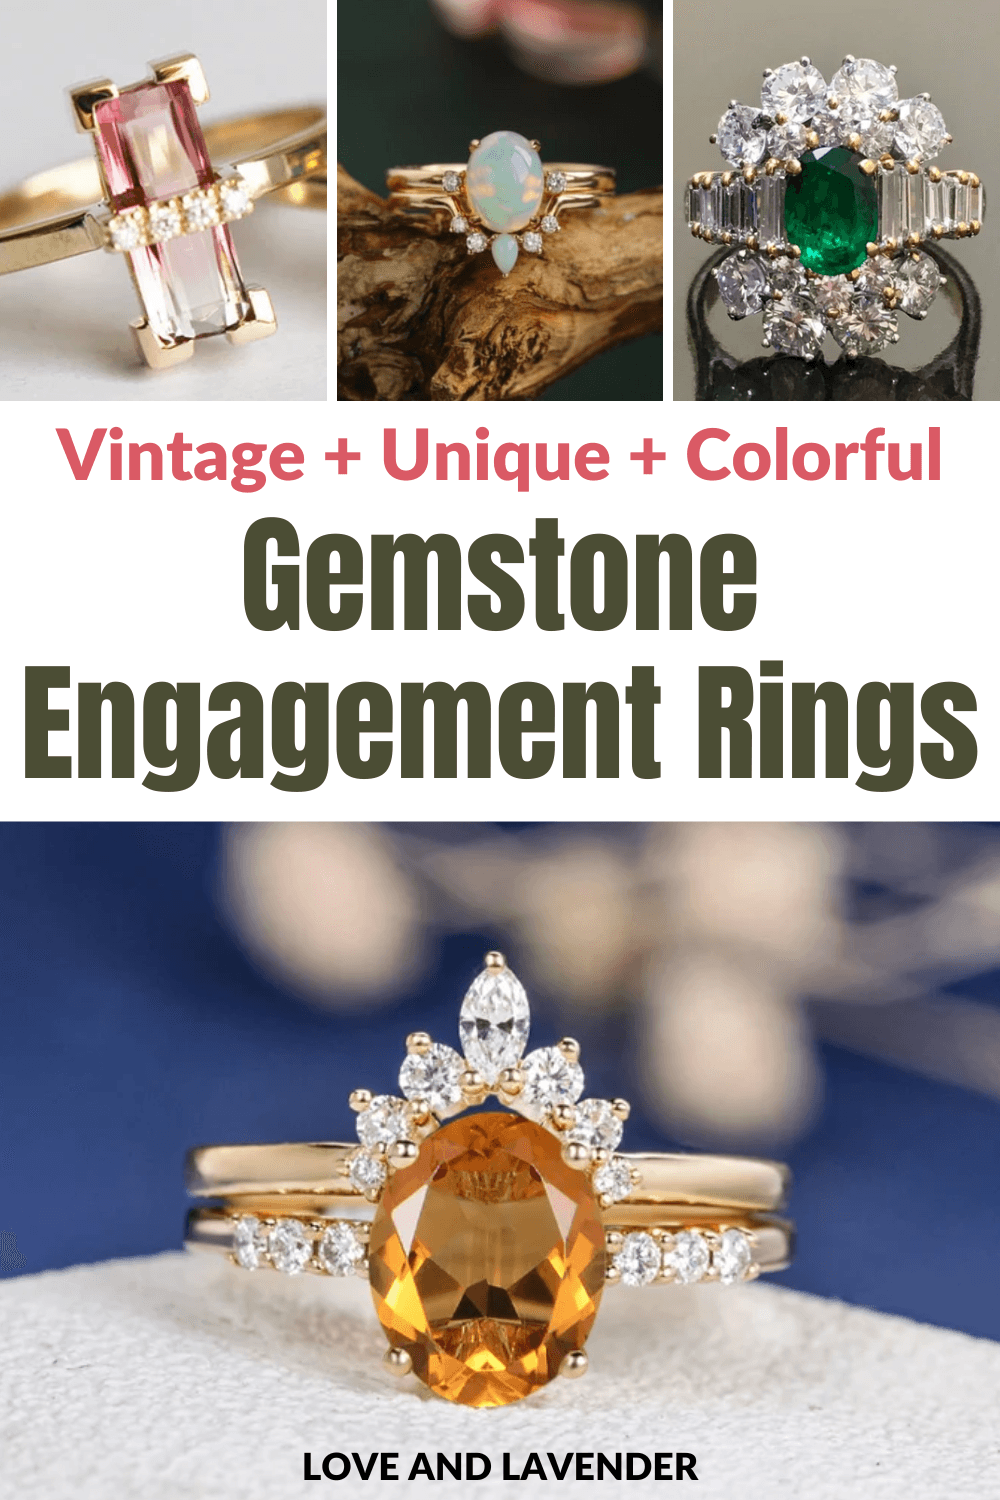 Gems are the most beautiful of all minerals and stones. You either love or hate them, but no matter your opinion, any person who gets engaged should have a fabulous engagement ring made from a favorite gem. And here are the best-colored gemstone engagement rings that we recommend!